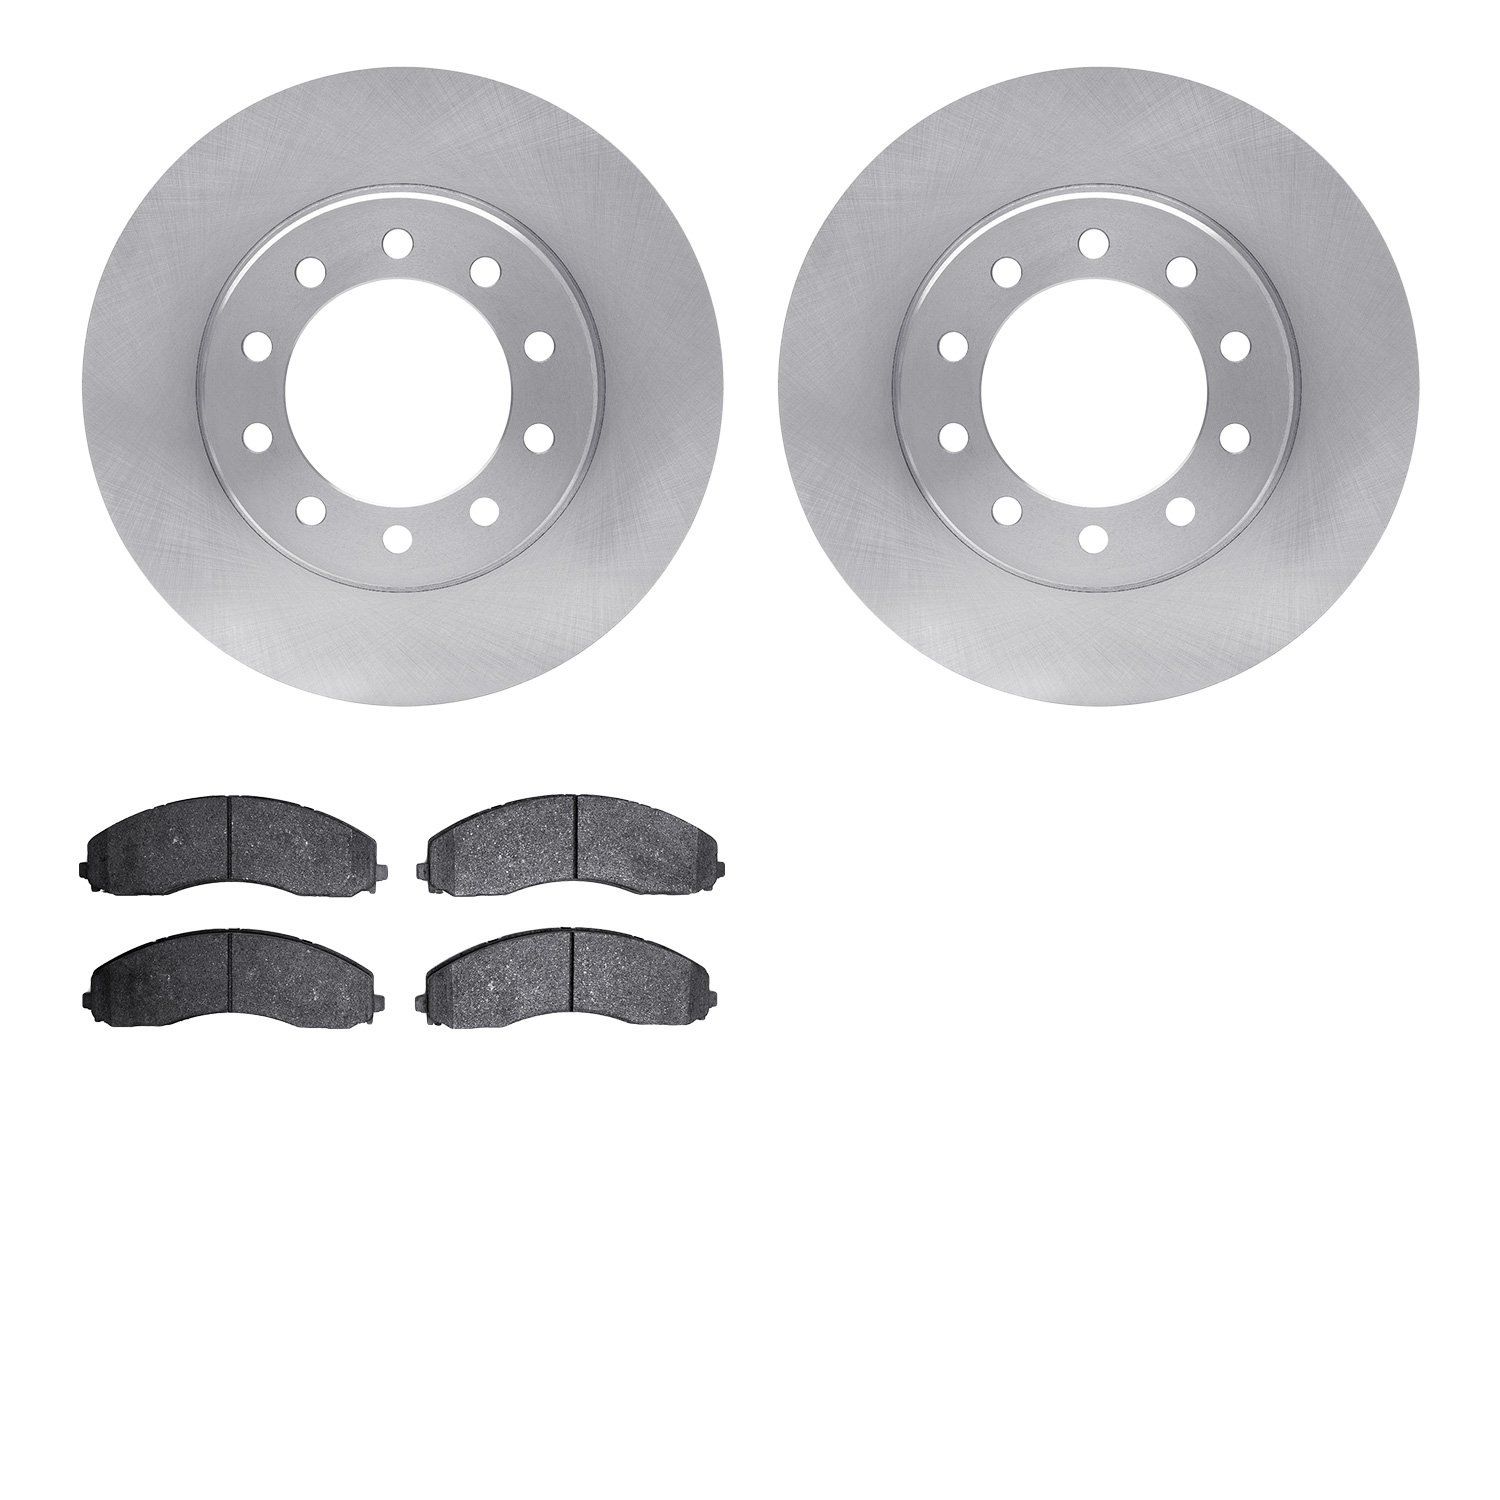 6402-54326 Brake Rotors with Ultimate-Duty Brake Pads, Fits Select Ford/Lincoln/Mercury/Mazda, Position: Front